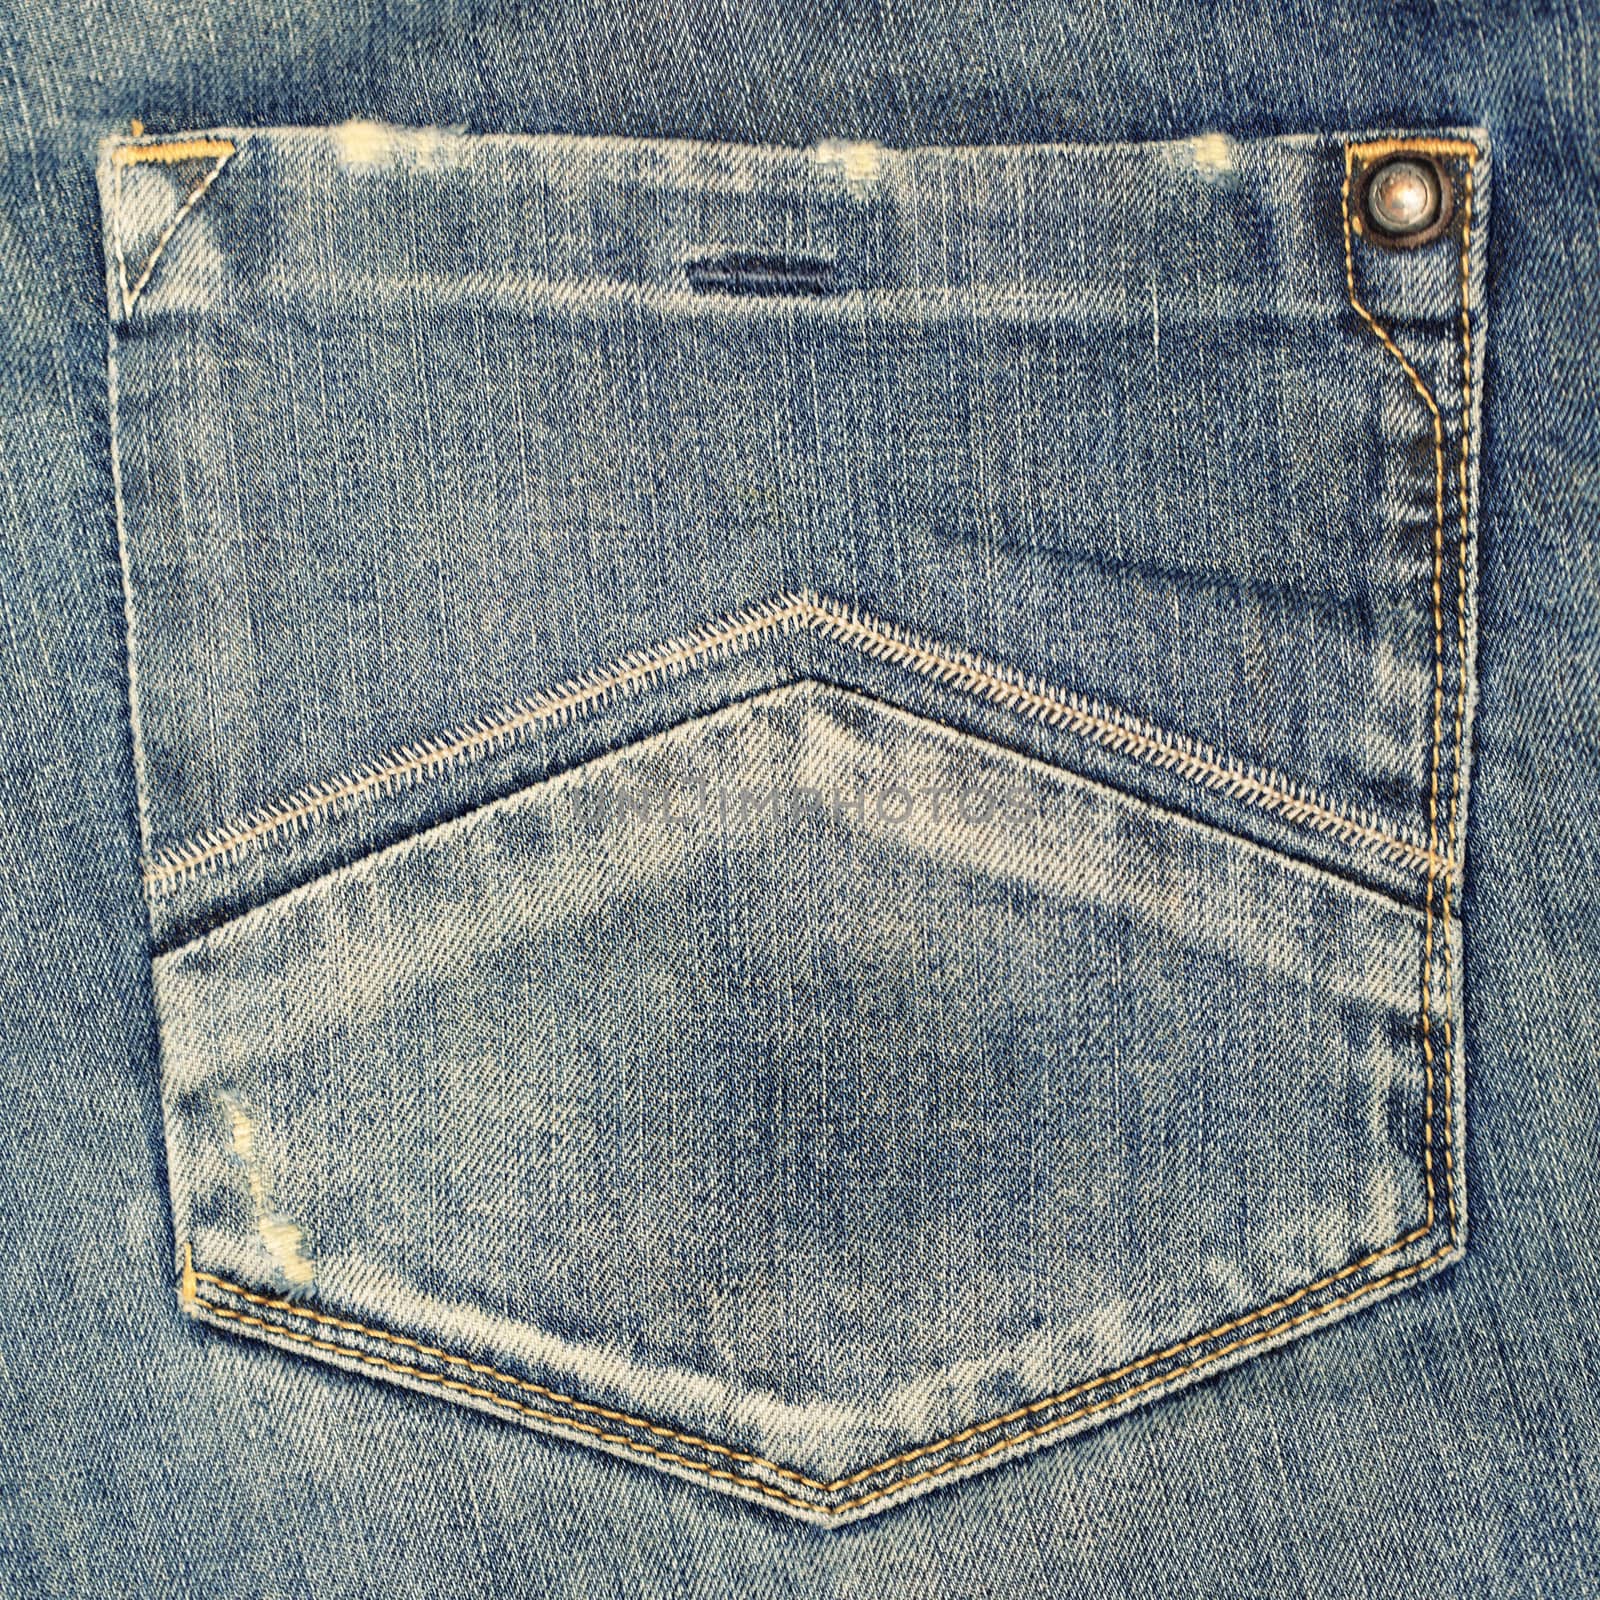 Blue jeans fabric with back pocket